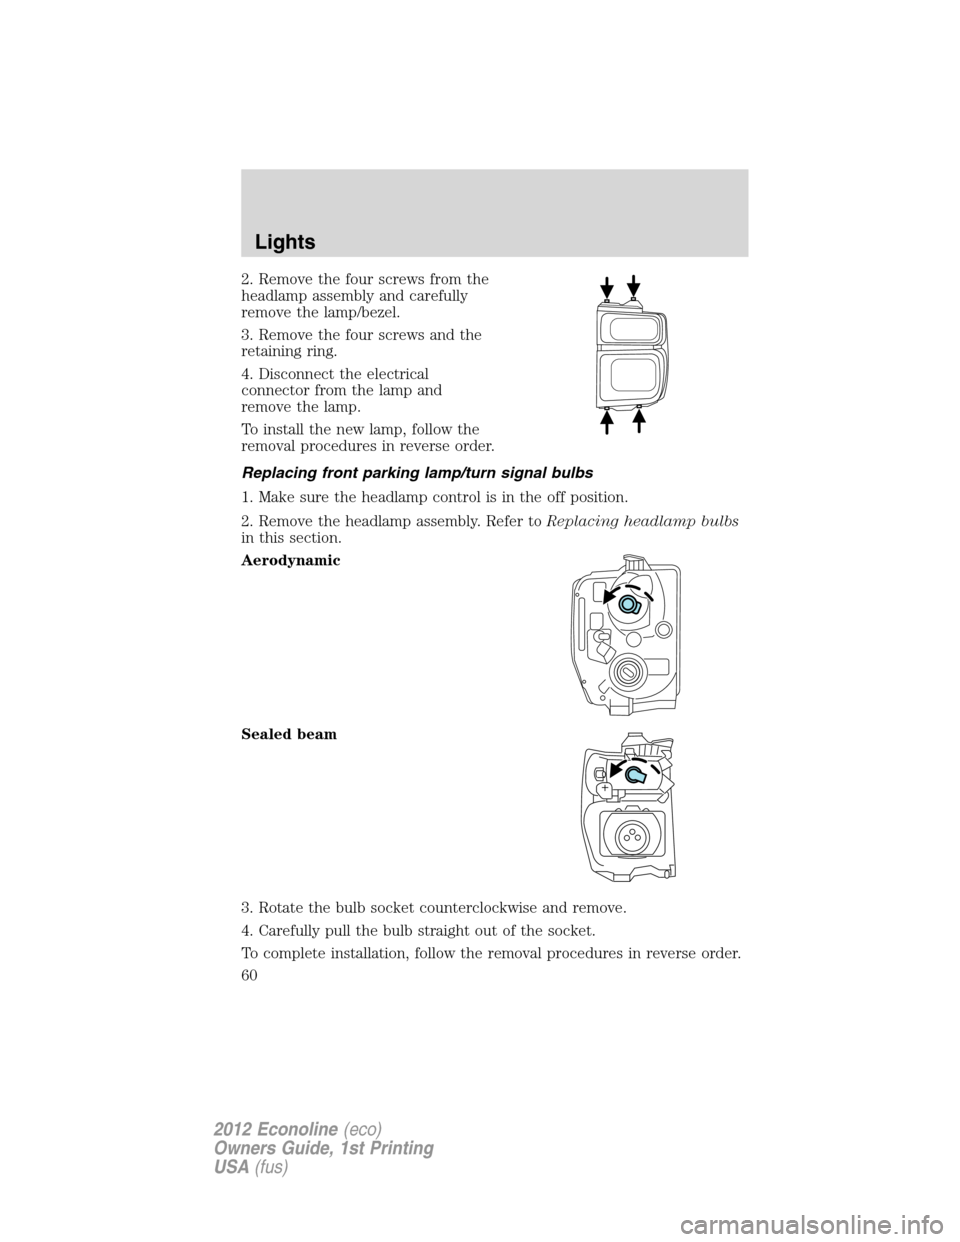 FORD E SERIES 2012 4.G Owners Manual 2. Remove the four screws from the
headlamp assembly and carefully
remove the lamp/bezel.
3. Remove the four screws and the
retaining ring.
4. Disconnect the electrical
connector from the lamp and
rem